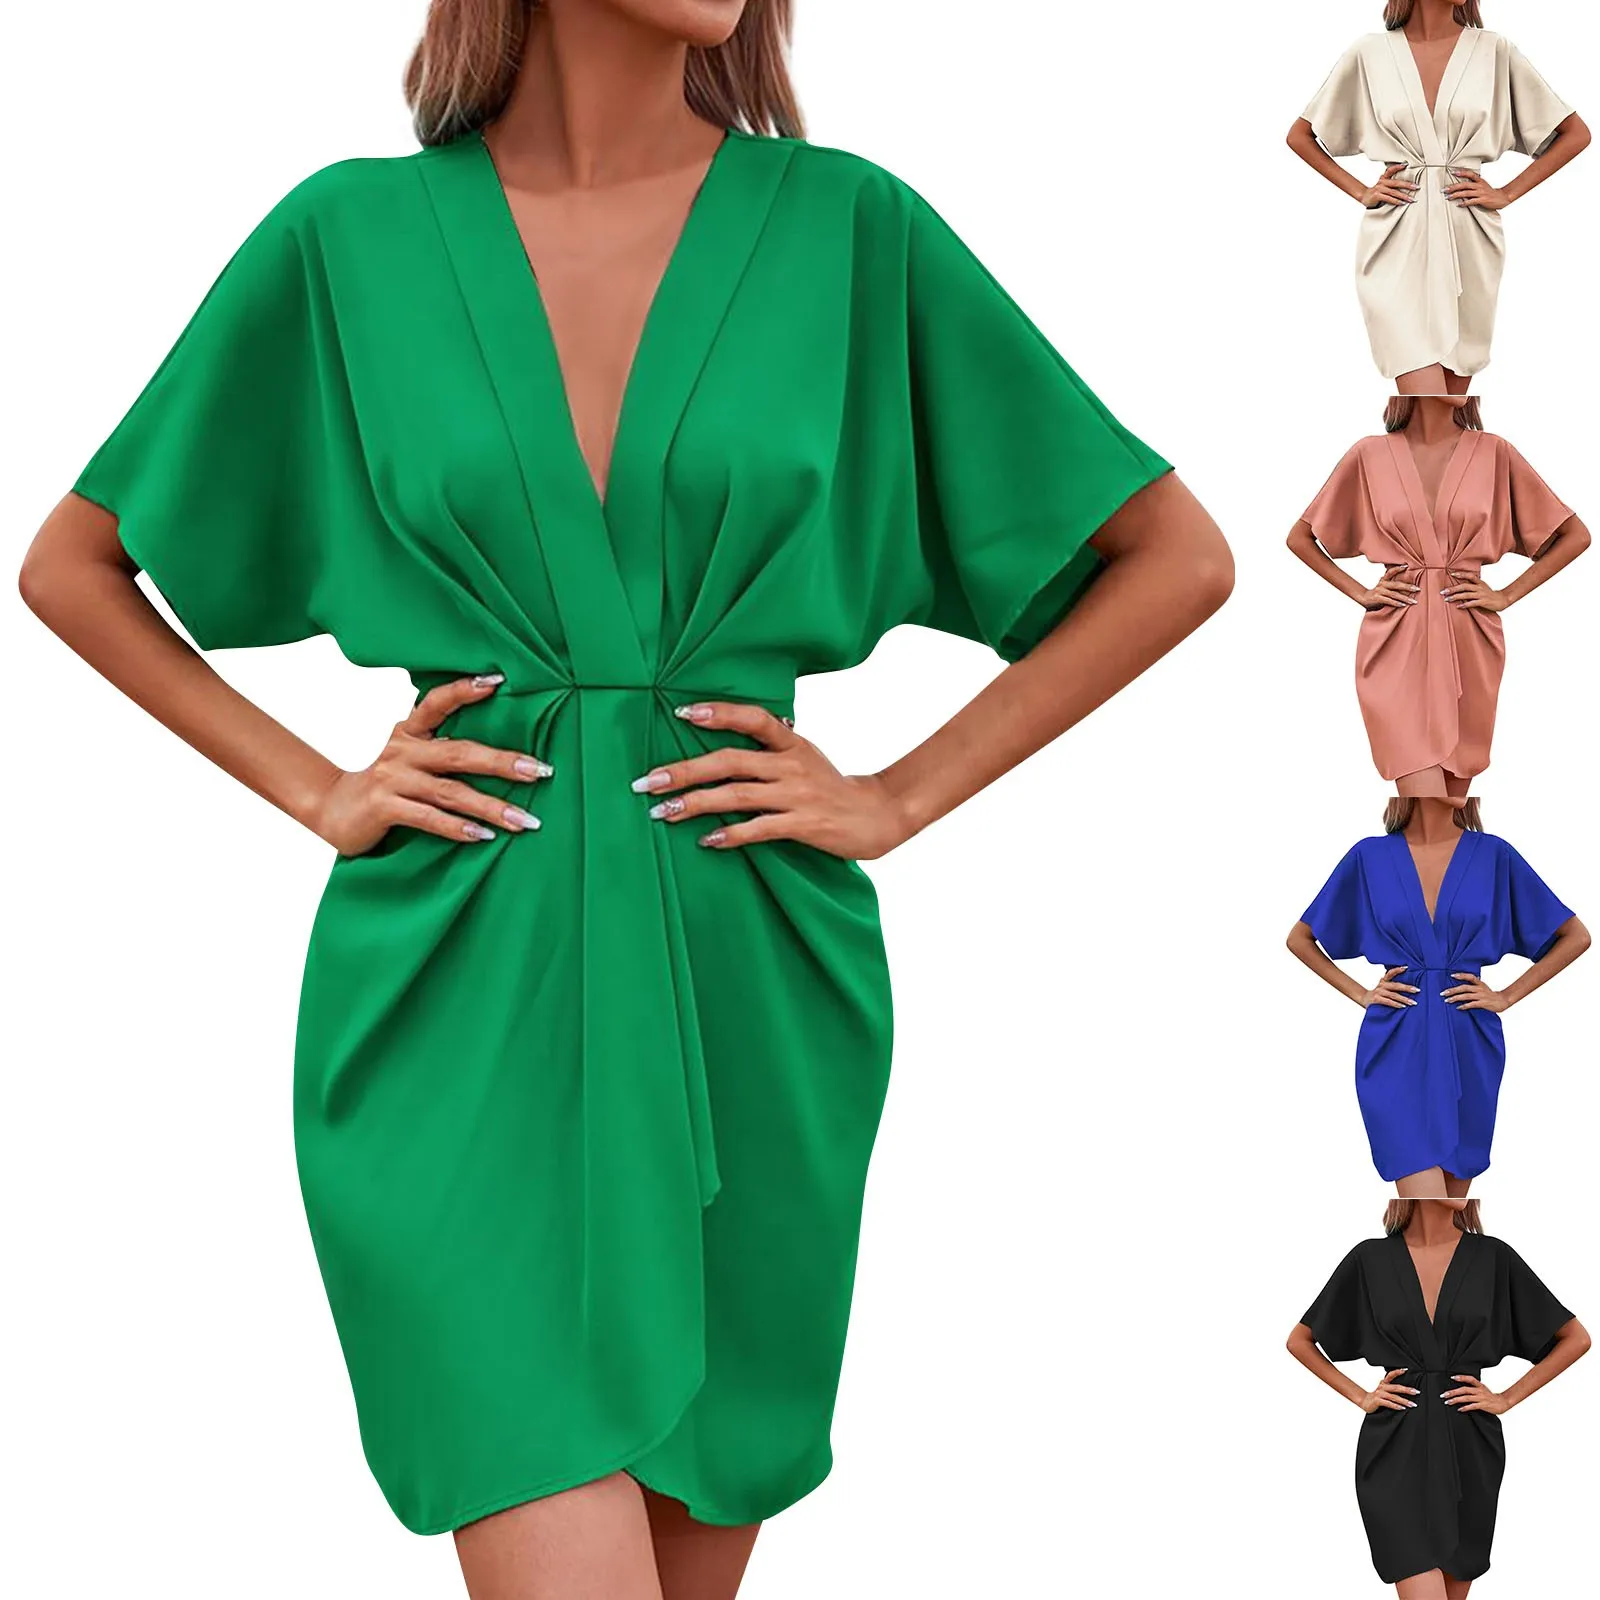 

Women's Fashionable Dresses Solid Color V Neck Pleated Short Sleeved Irregular Dress Youthful Slim-Type Dress ropa de mujer